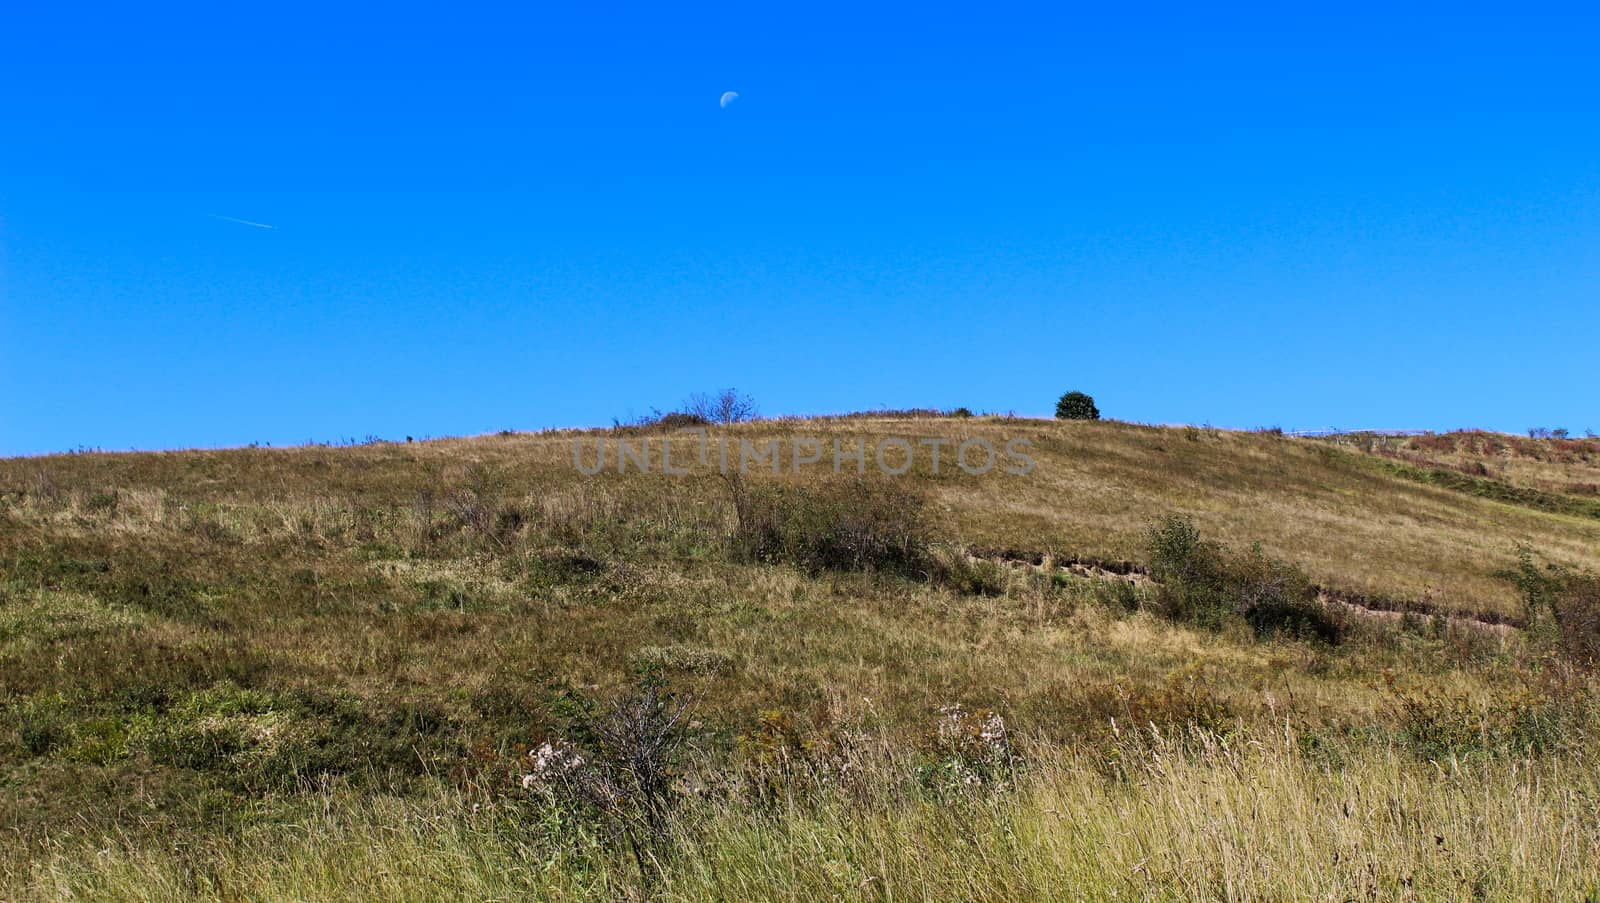 Dry grass on a meadow with the sky in the background. There is a moon in the sky in half a day. Taken on the way to the mountain Bjelašnica, Bosnia and Herzegovina.